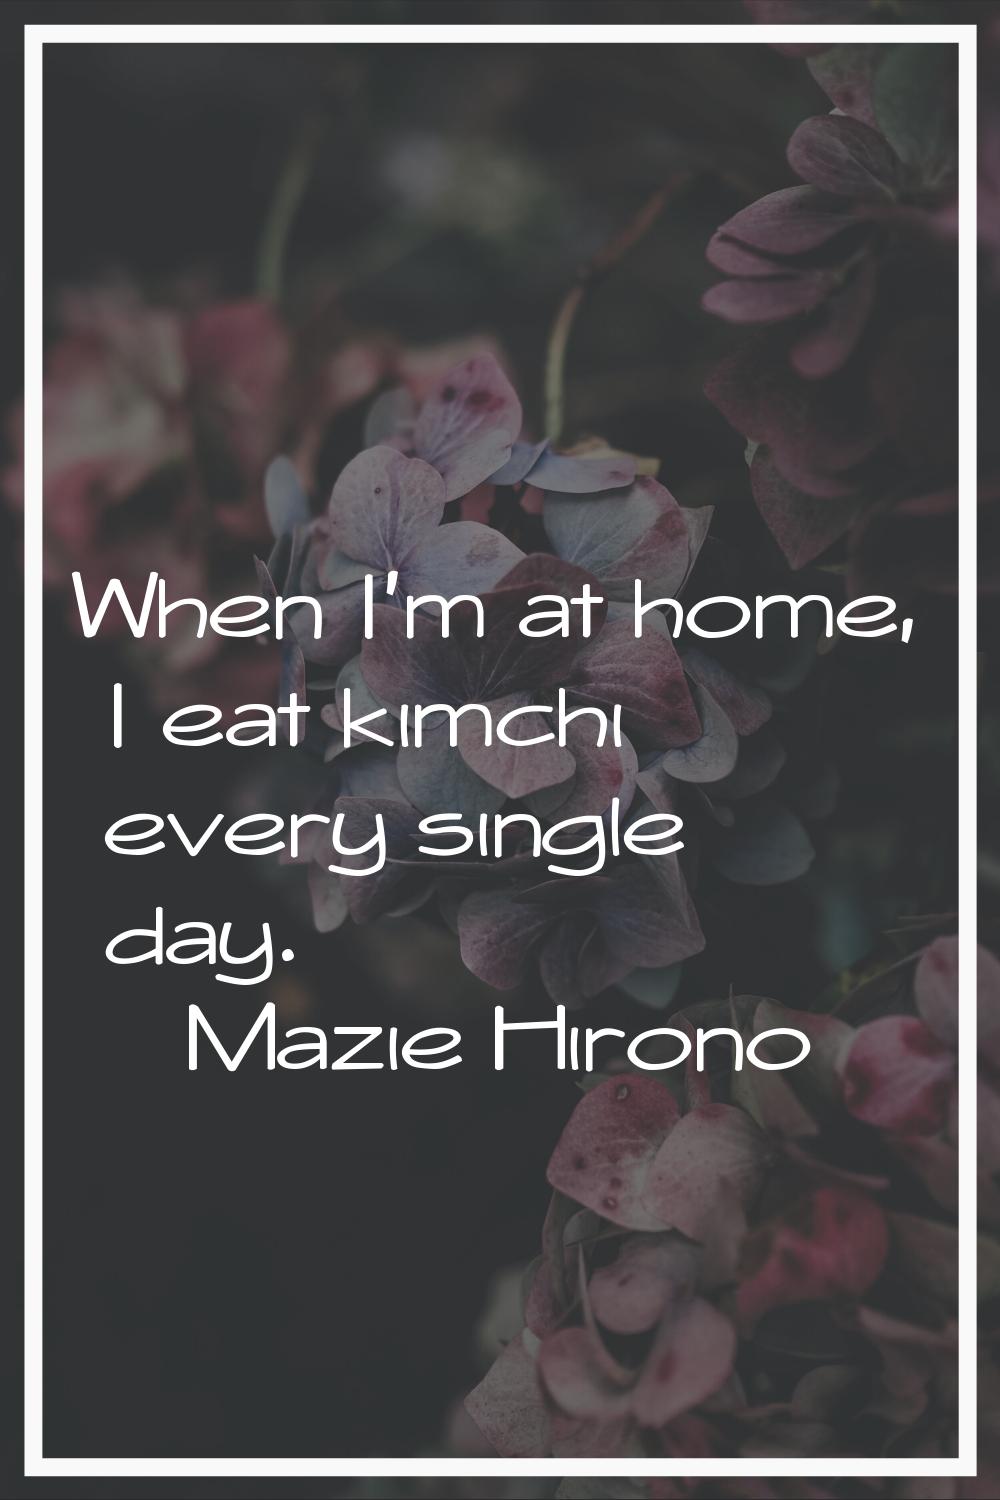 When I'm at home, I eat kimchi every single day.